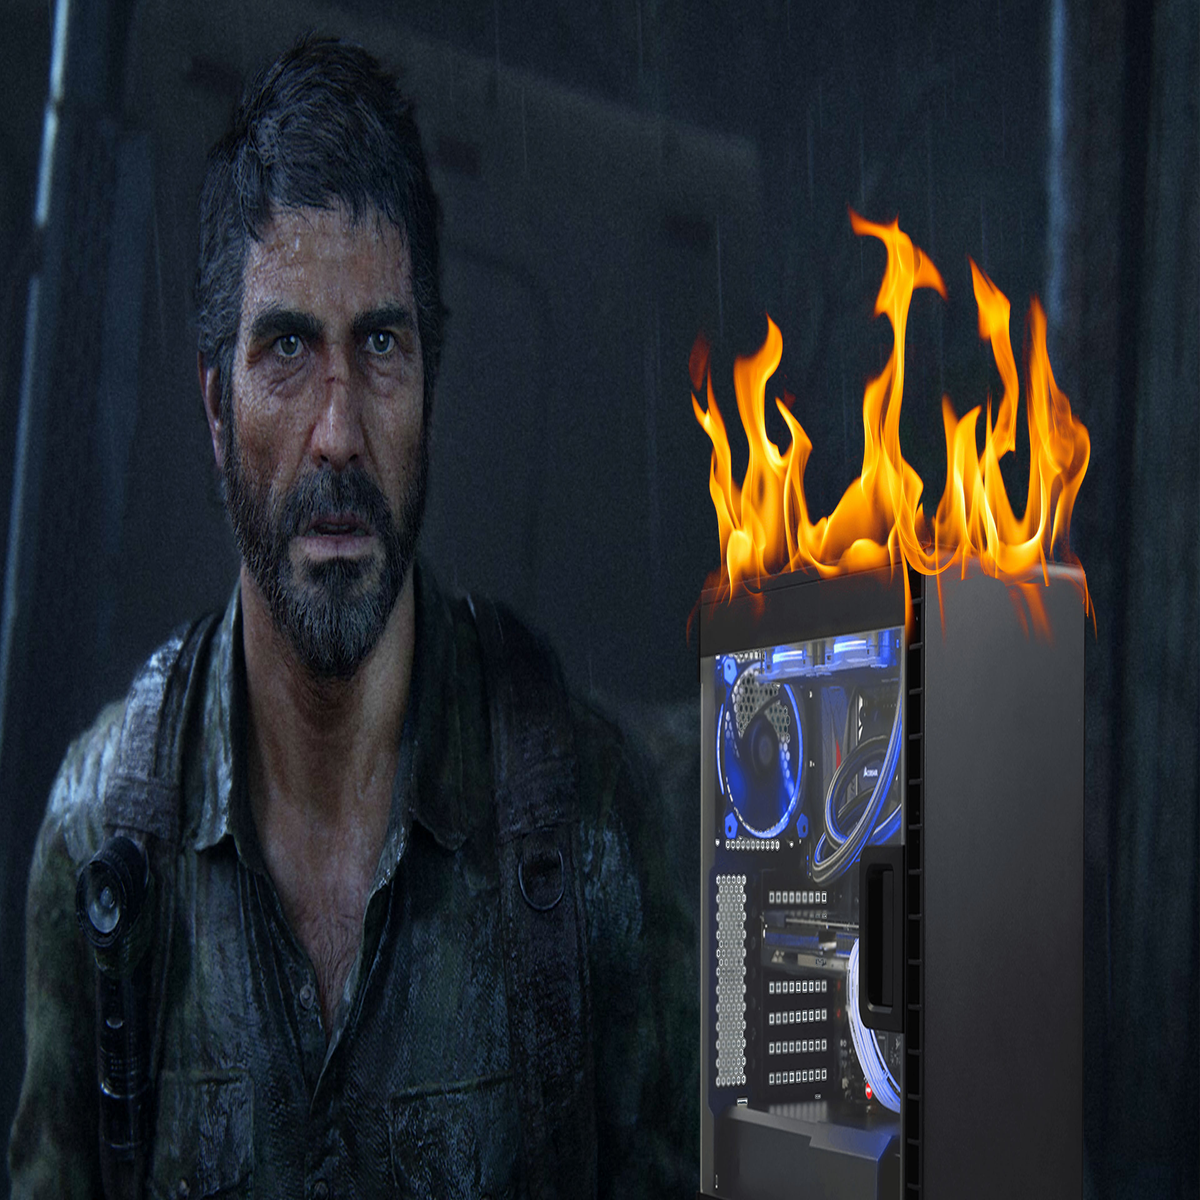 The Last of Us PC (Review) Fantastic story, but a rough PC port